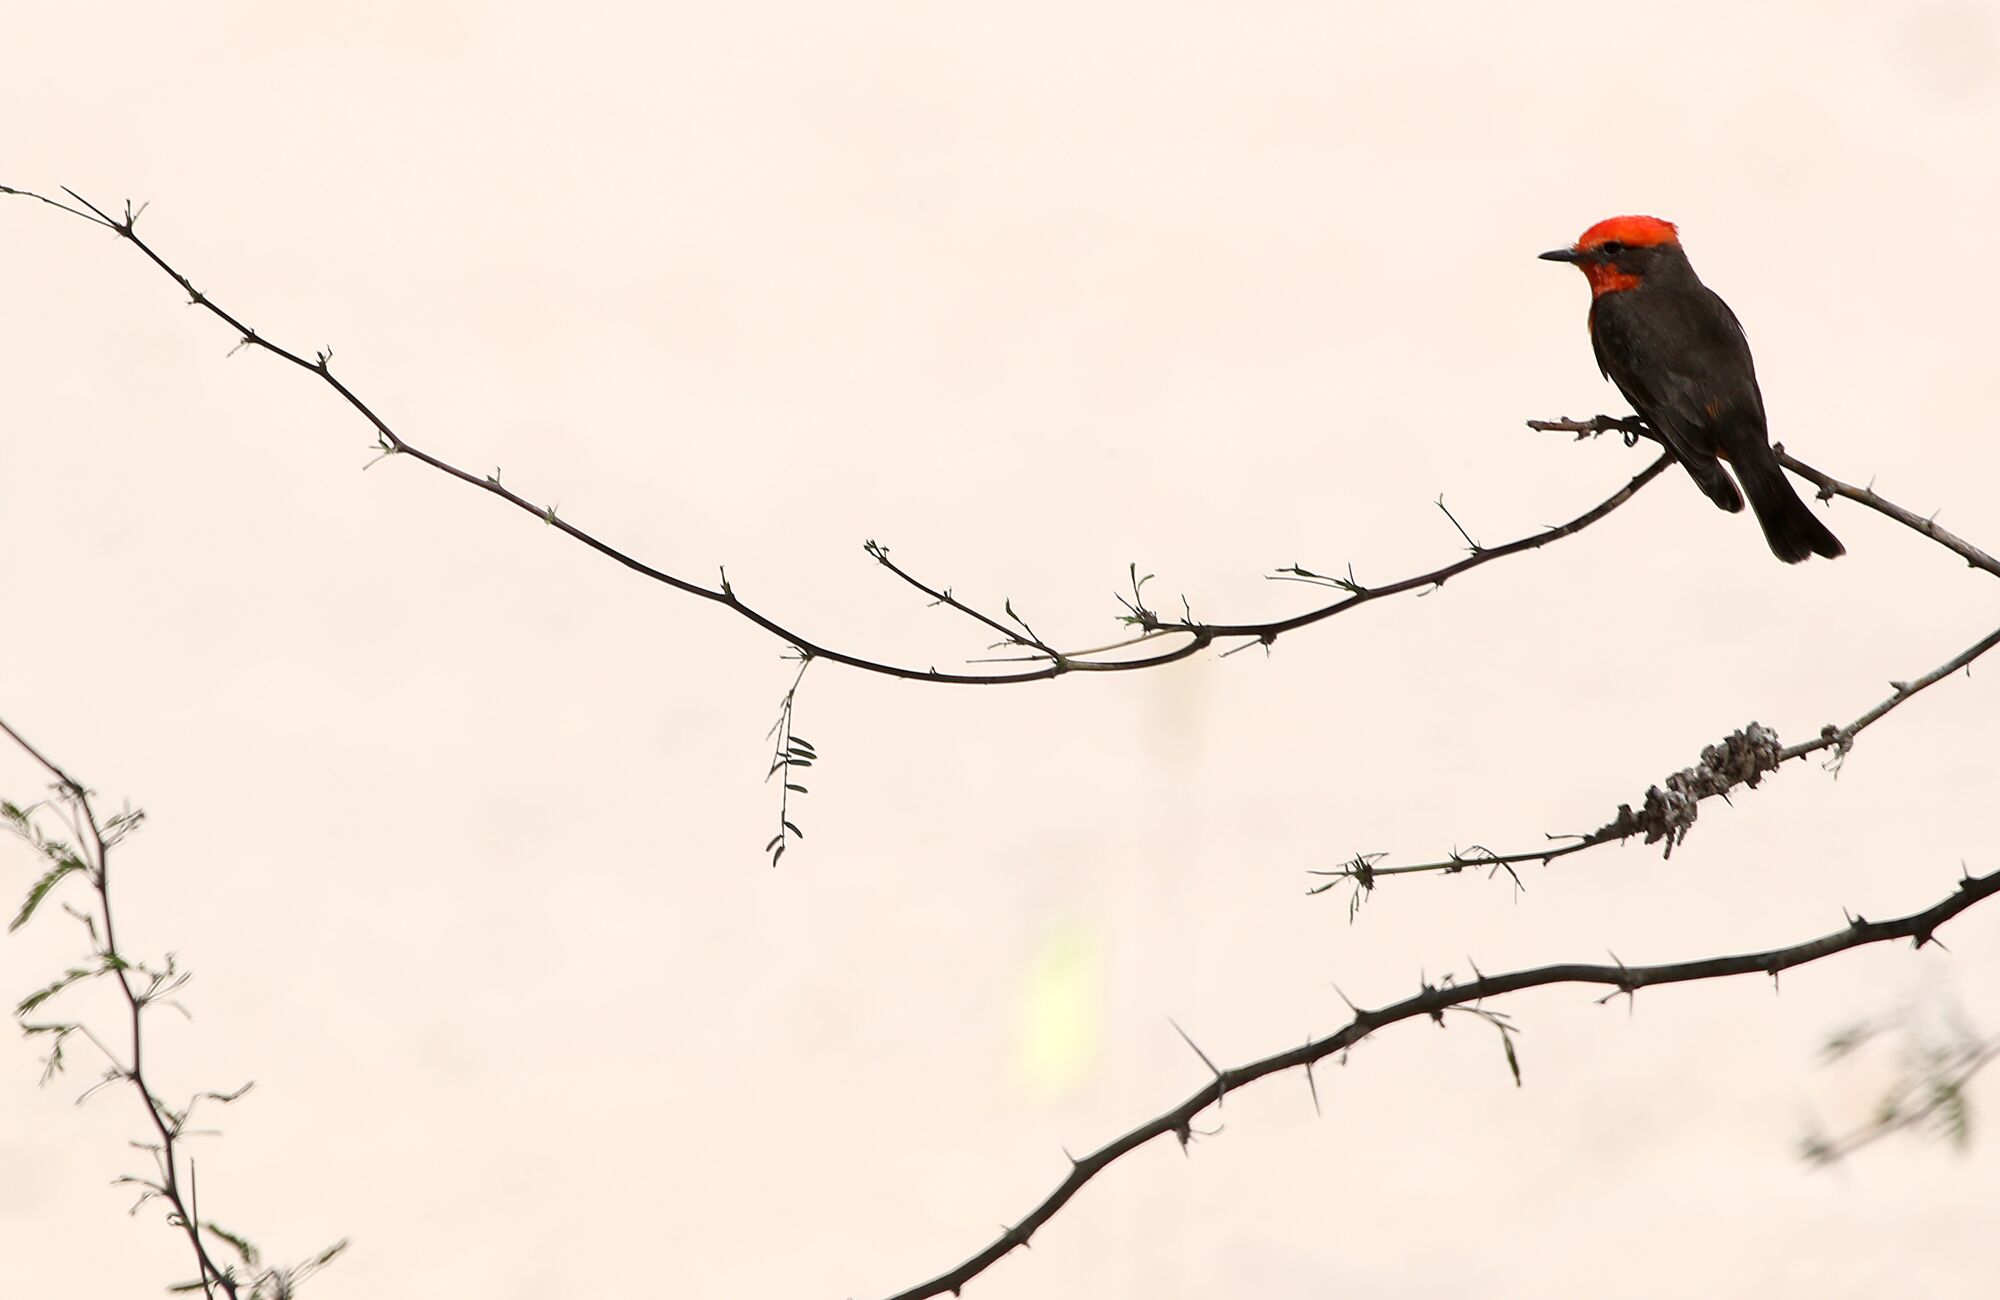 A vermilion flycatcher perches on a tree in a reforestation project area in the Colorado River Delta in Mexico